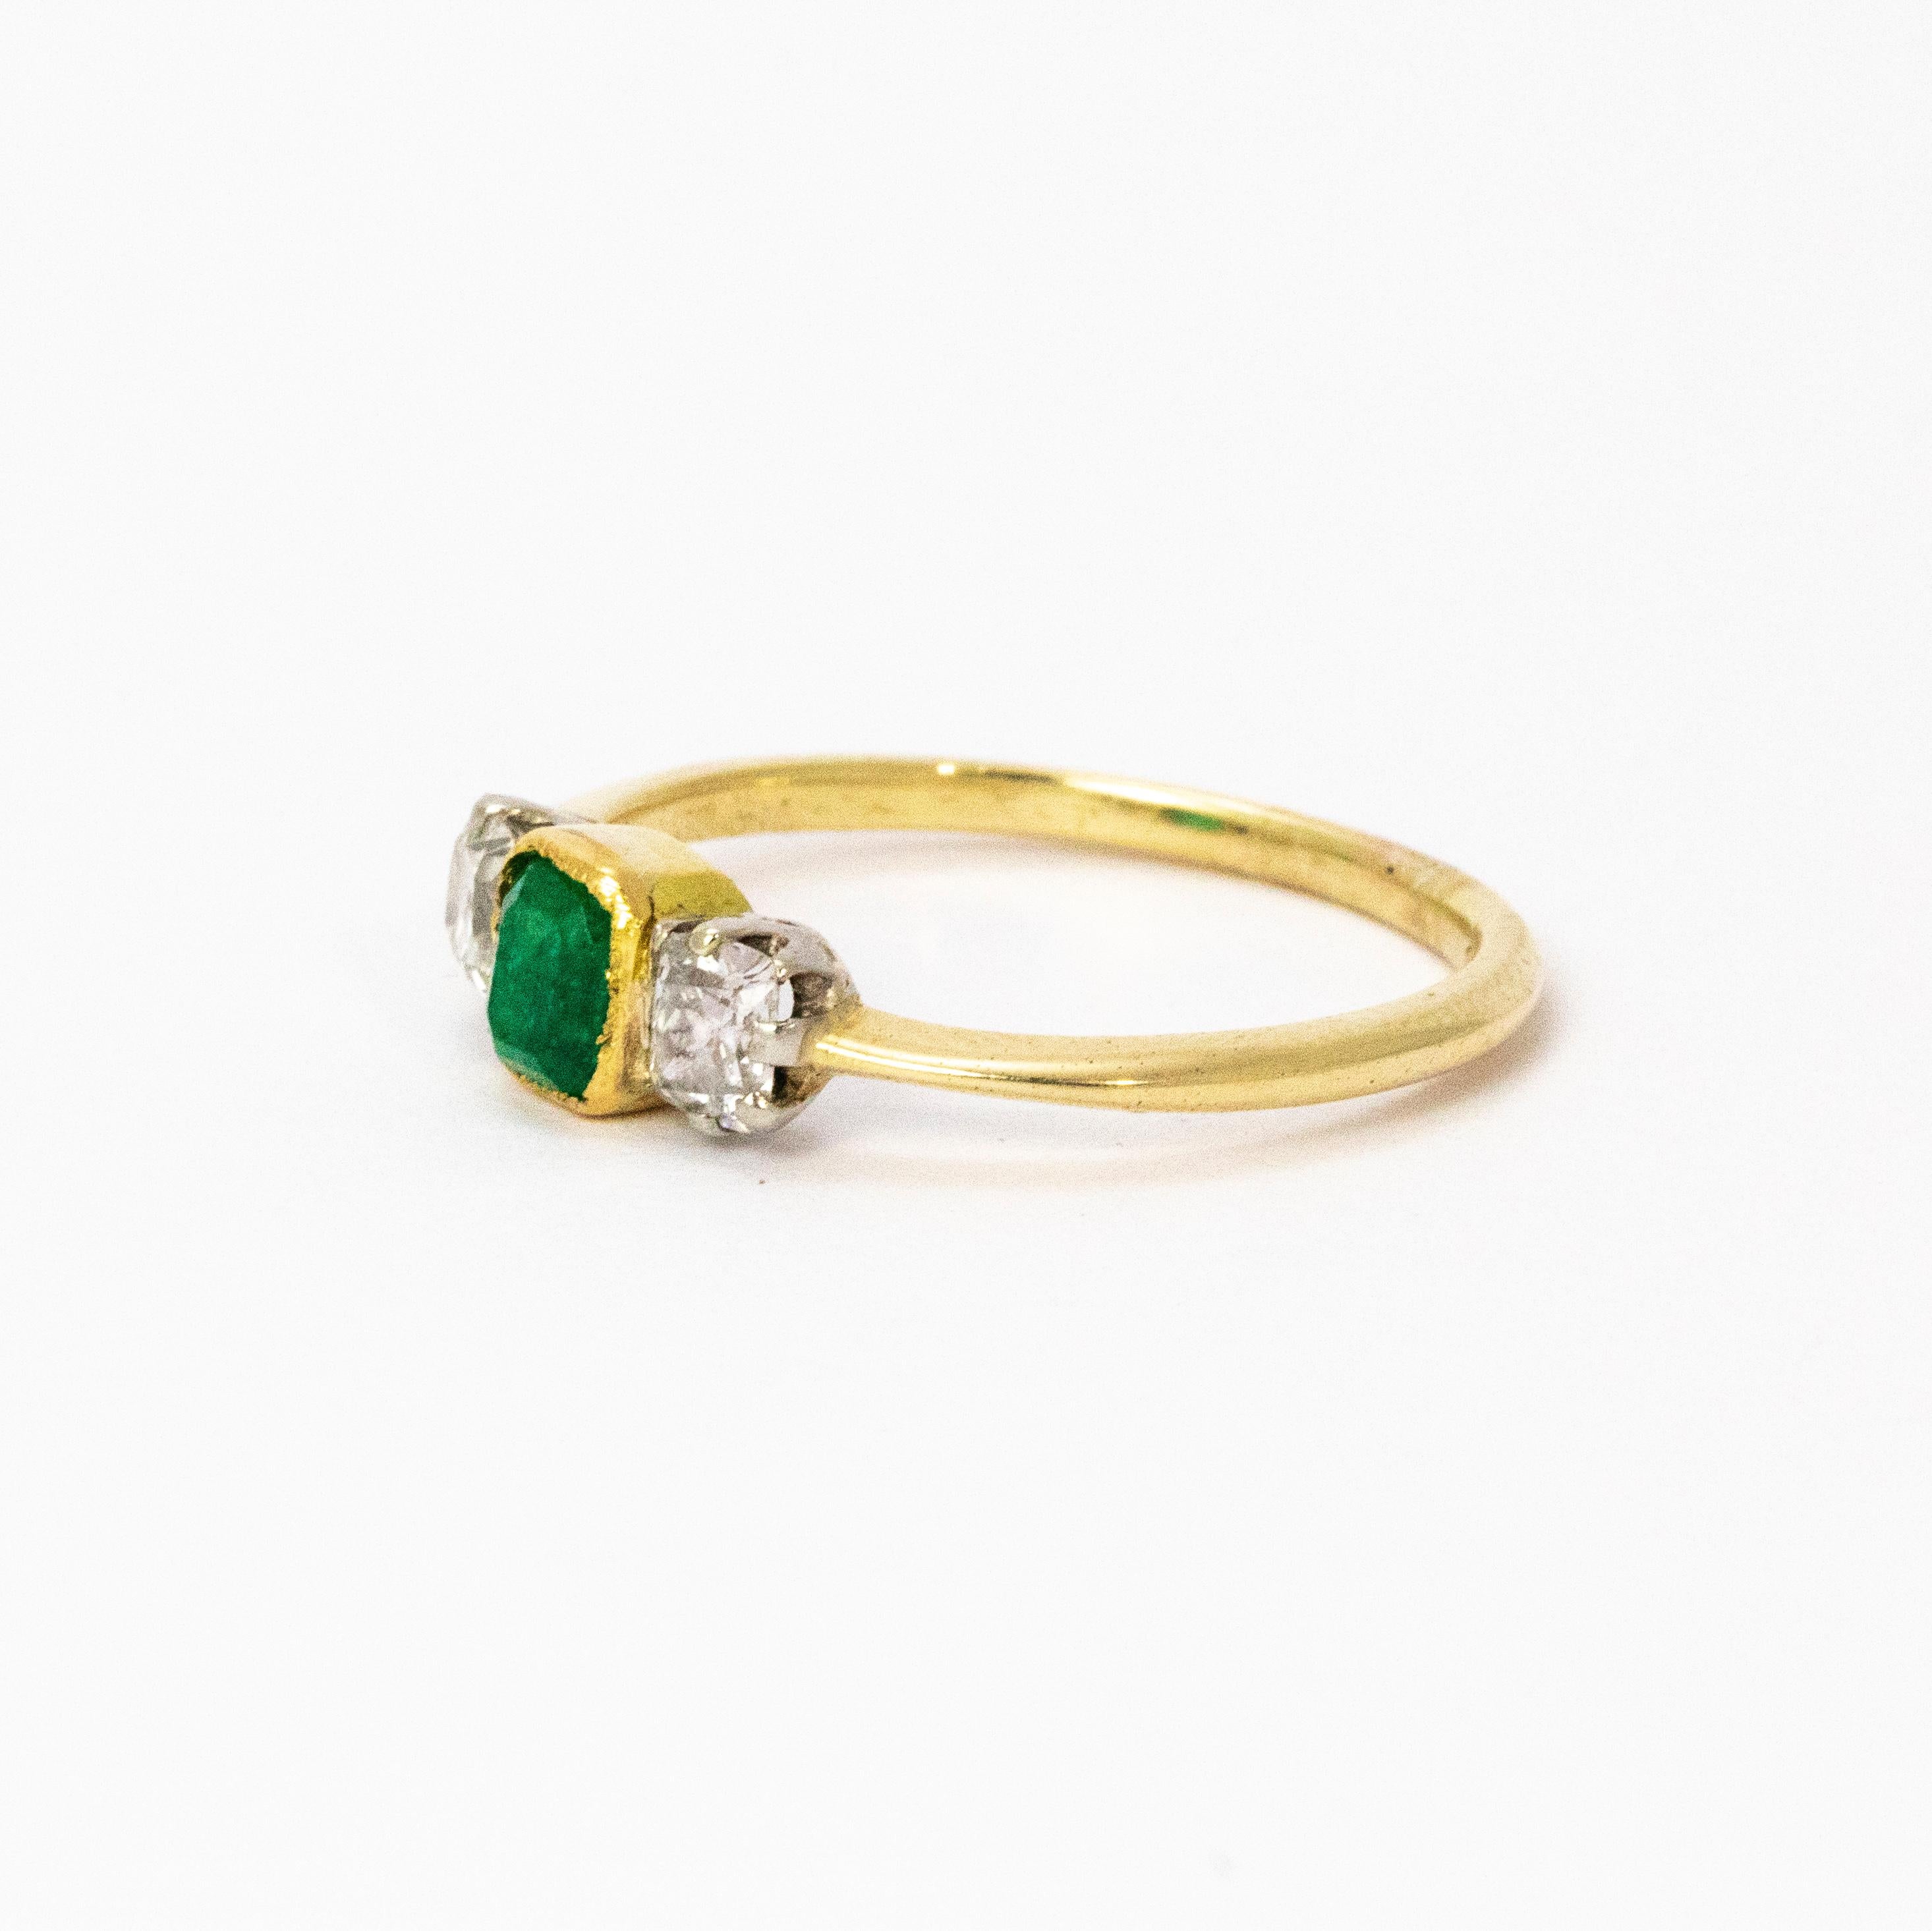 An elegant emerald and diamond three-stone ring crafted circa 1920. The fine central emerald measures approximately 45 points and has a good green colour. Flanking the central stone are two beautiful square old mine cute diamonds measuring a total